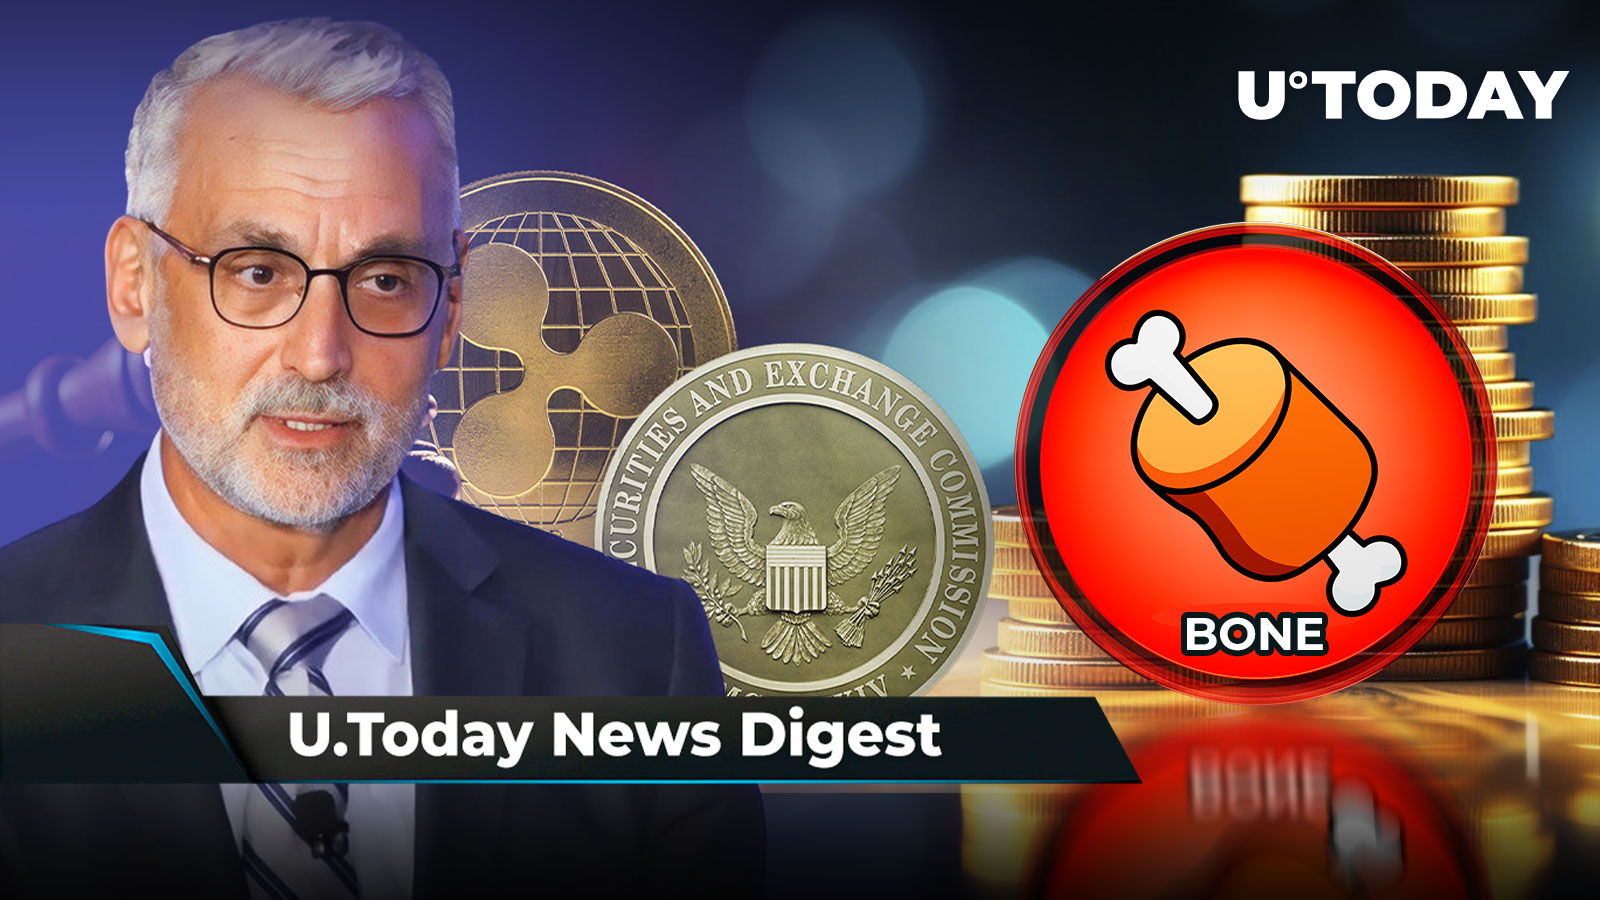 SHIB Team Member Shares Initial Reason Behind BONE Creation, Ripple CLO Teases XRP Case Resolution, Max Keiser Says Bitcoin ‘God Candle’ Coming: Crypto News Digest by U.Today